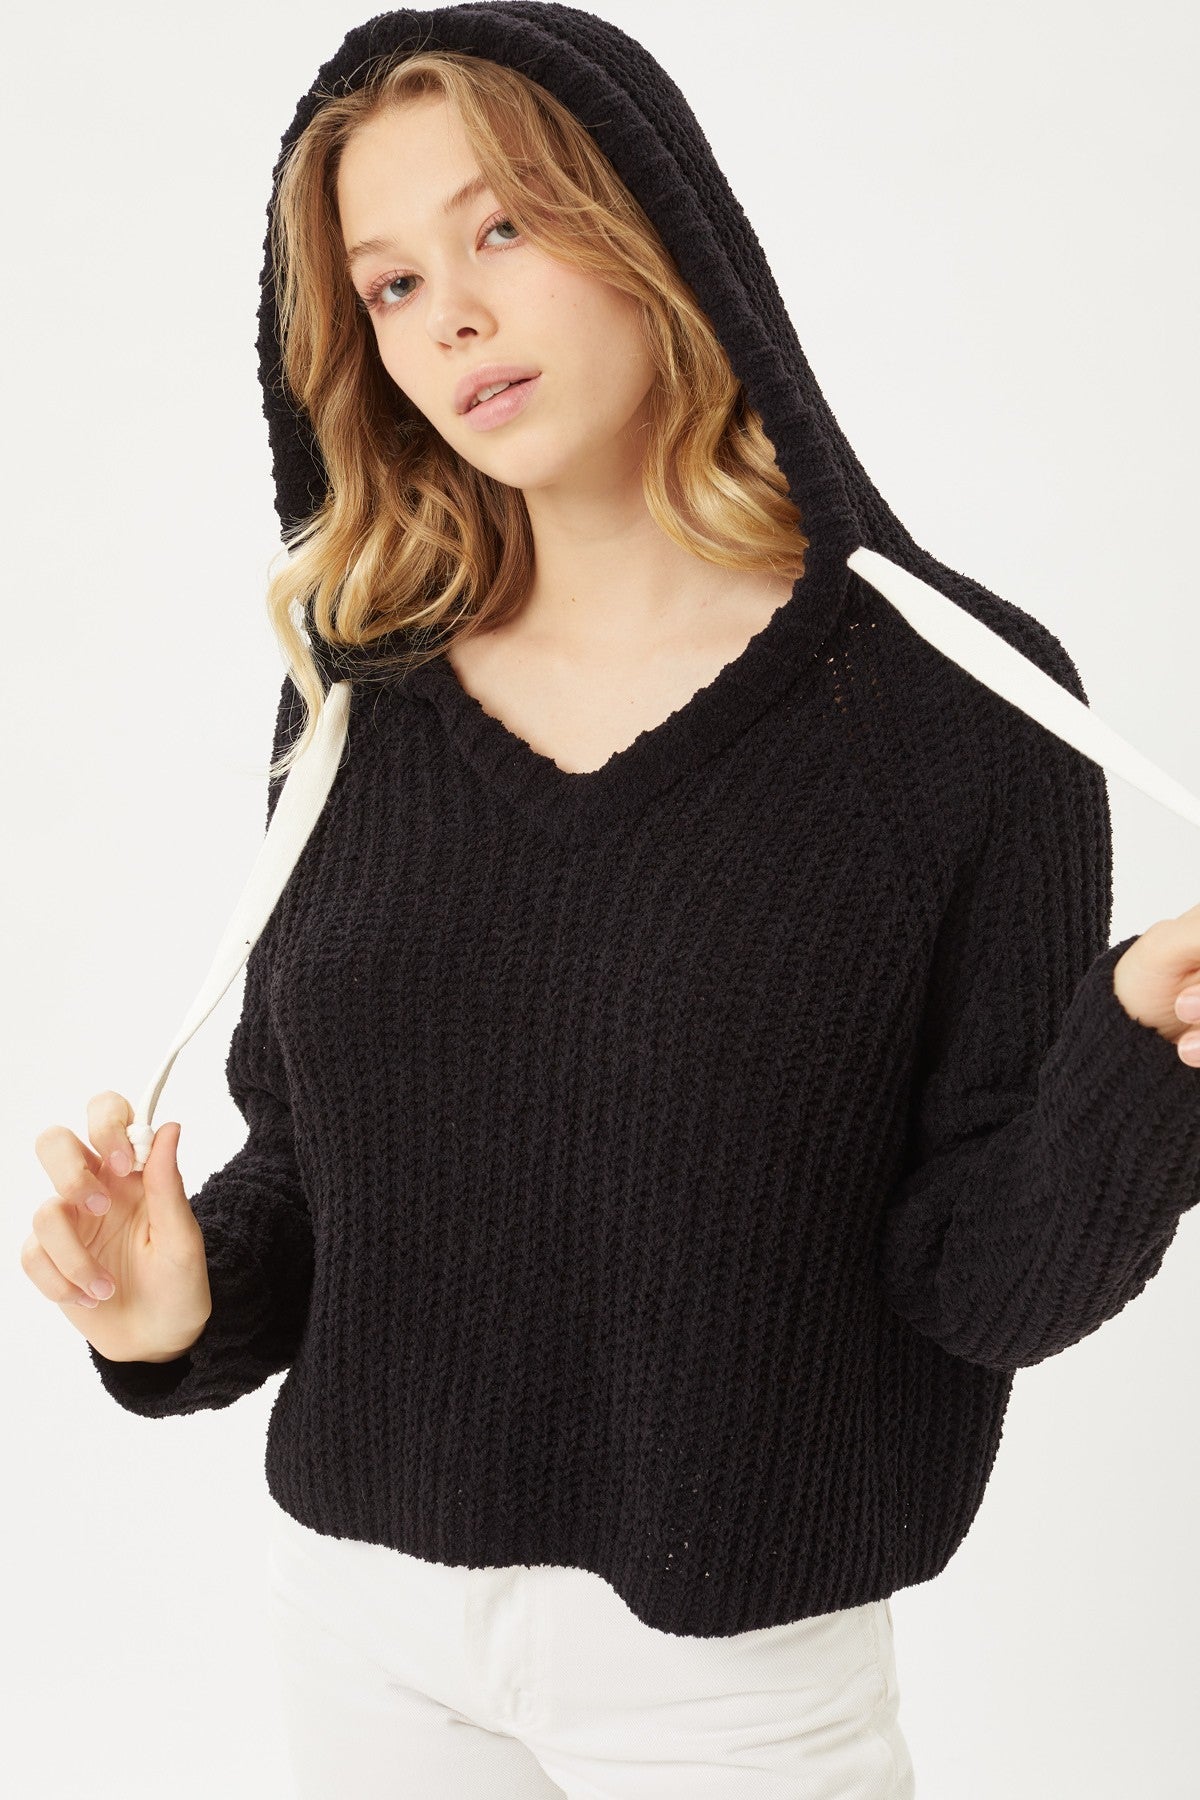 THE WENDY Pullover Hoodie Sweater Top